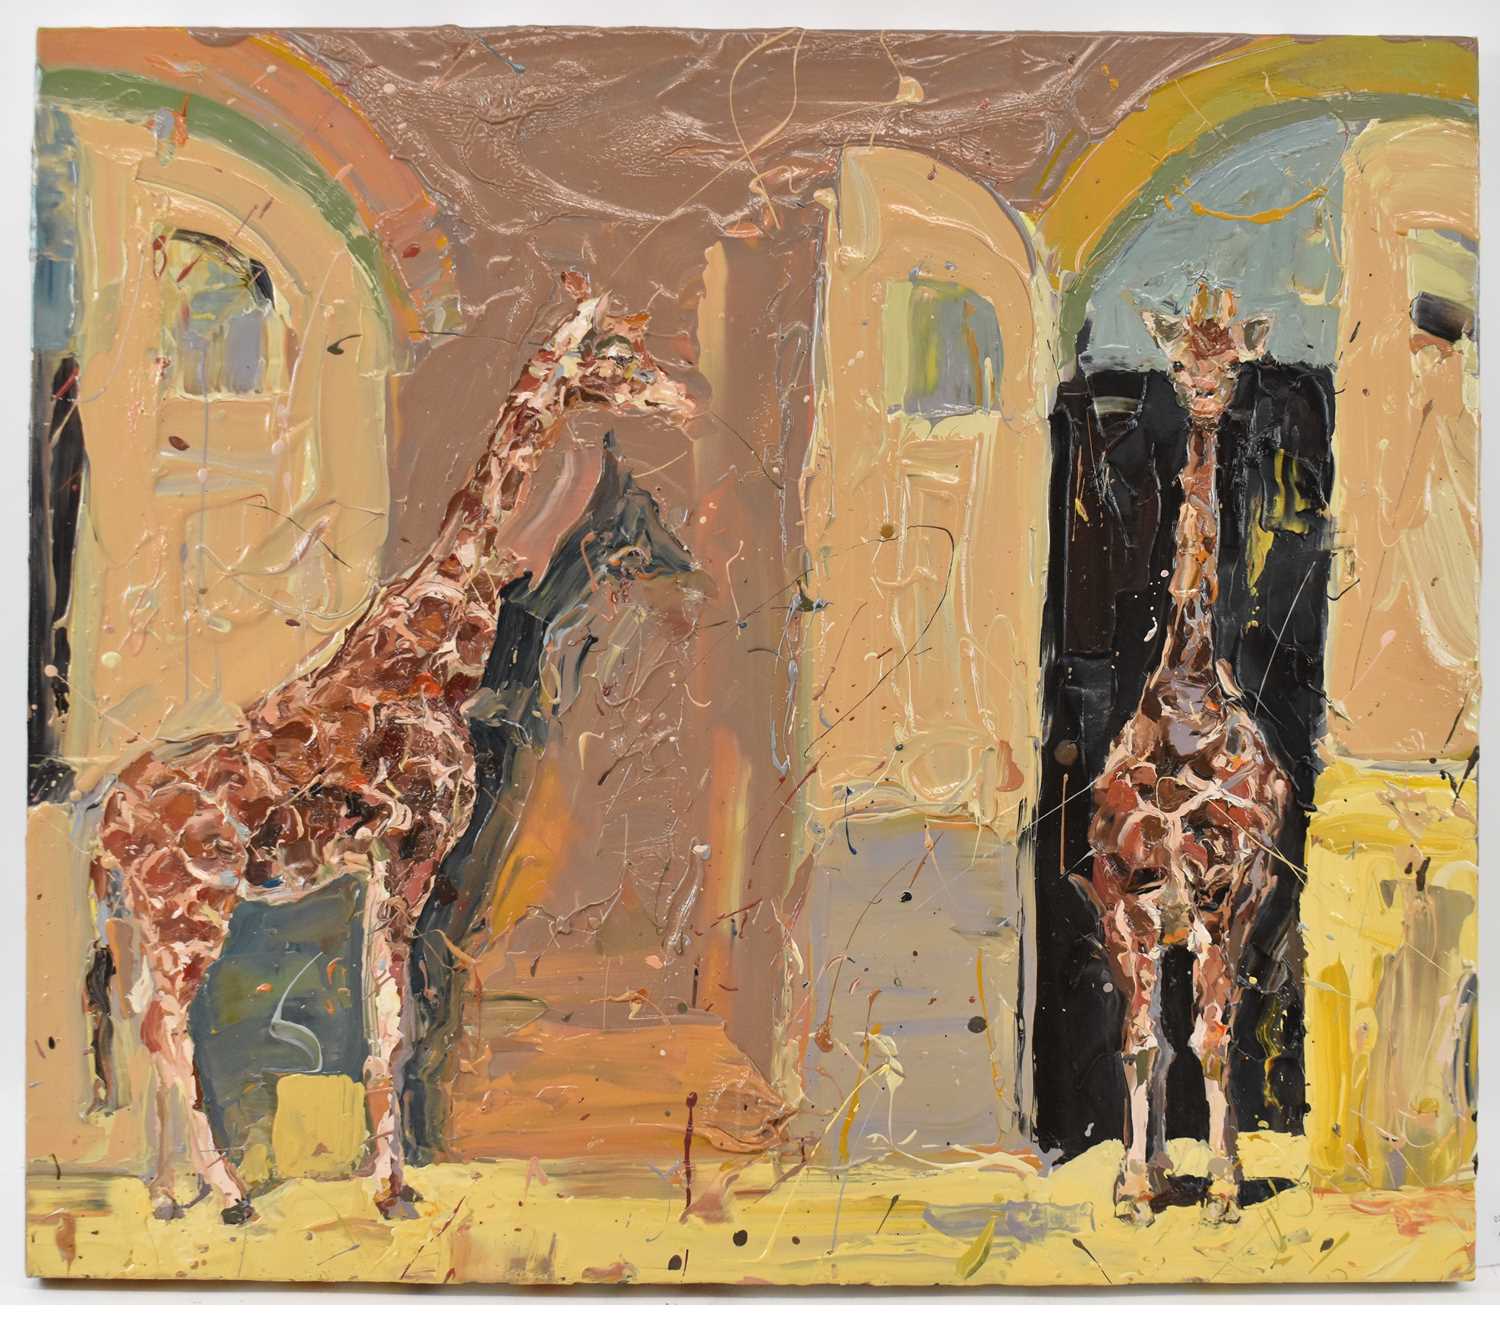 X PAUL RICHARDS (born 1949); large oil on canvas, study of giraffes, signed and dated 2010 verso, 66